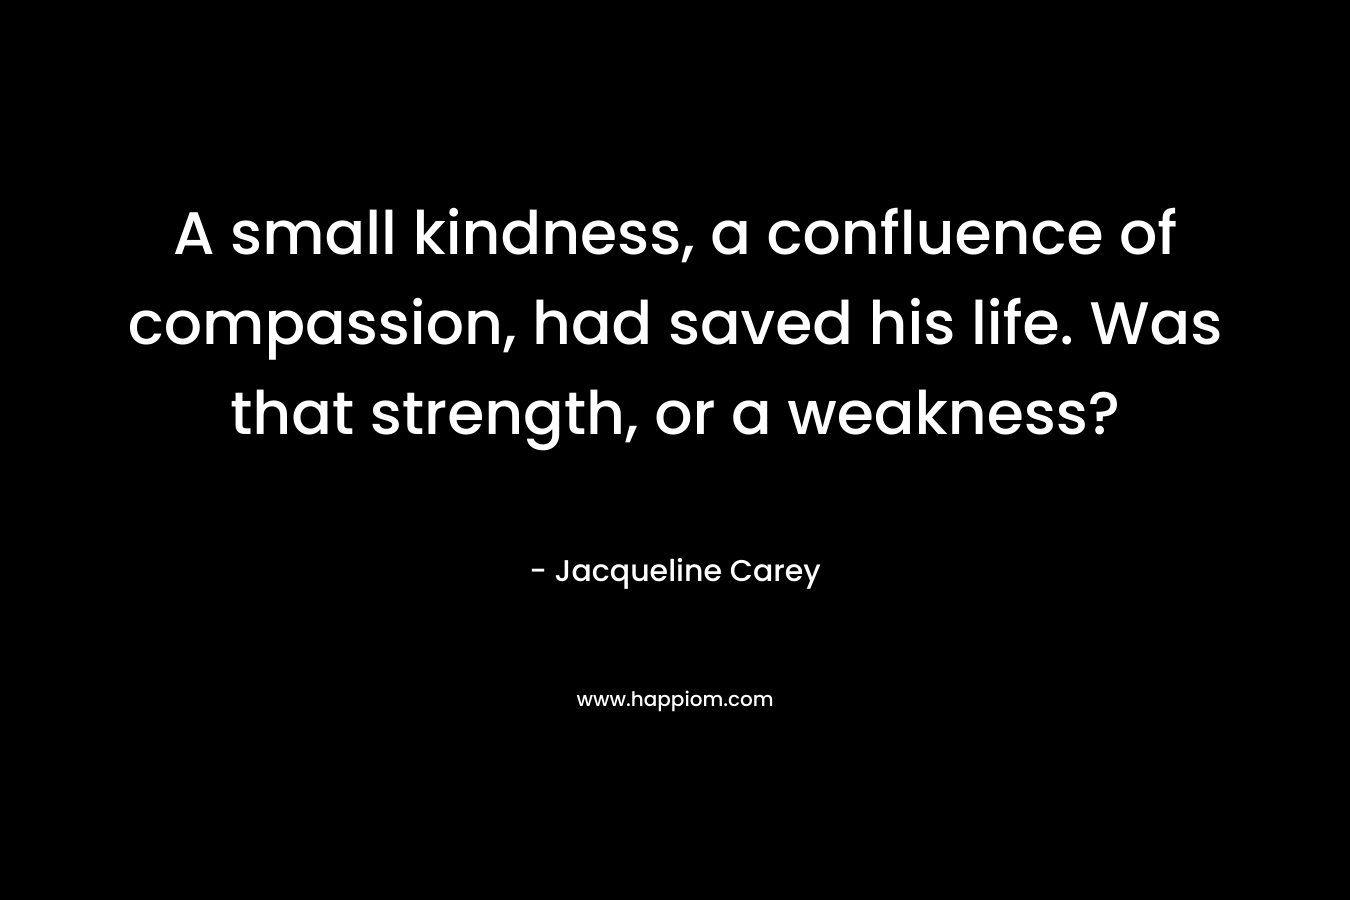 A small kindness, a confluence of compassion, had saved his life. Was that strength, or a weakness?